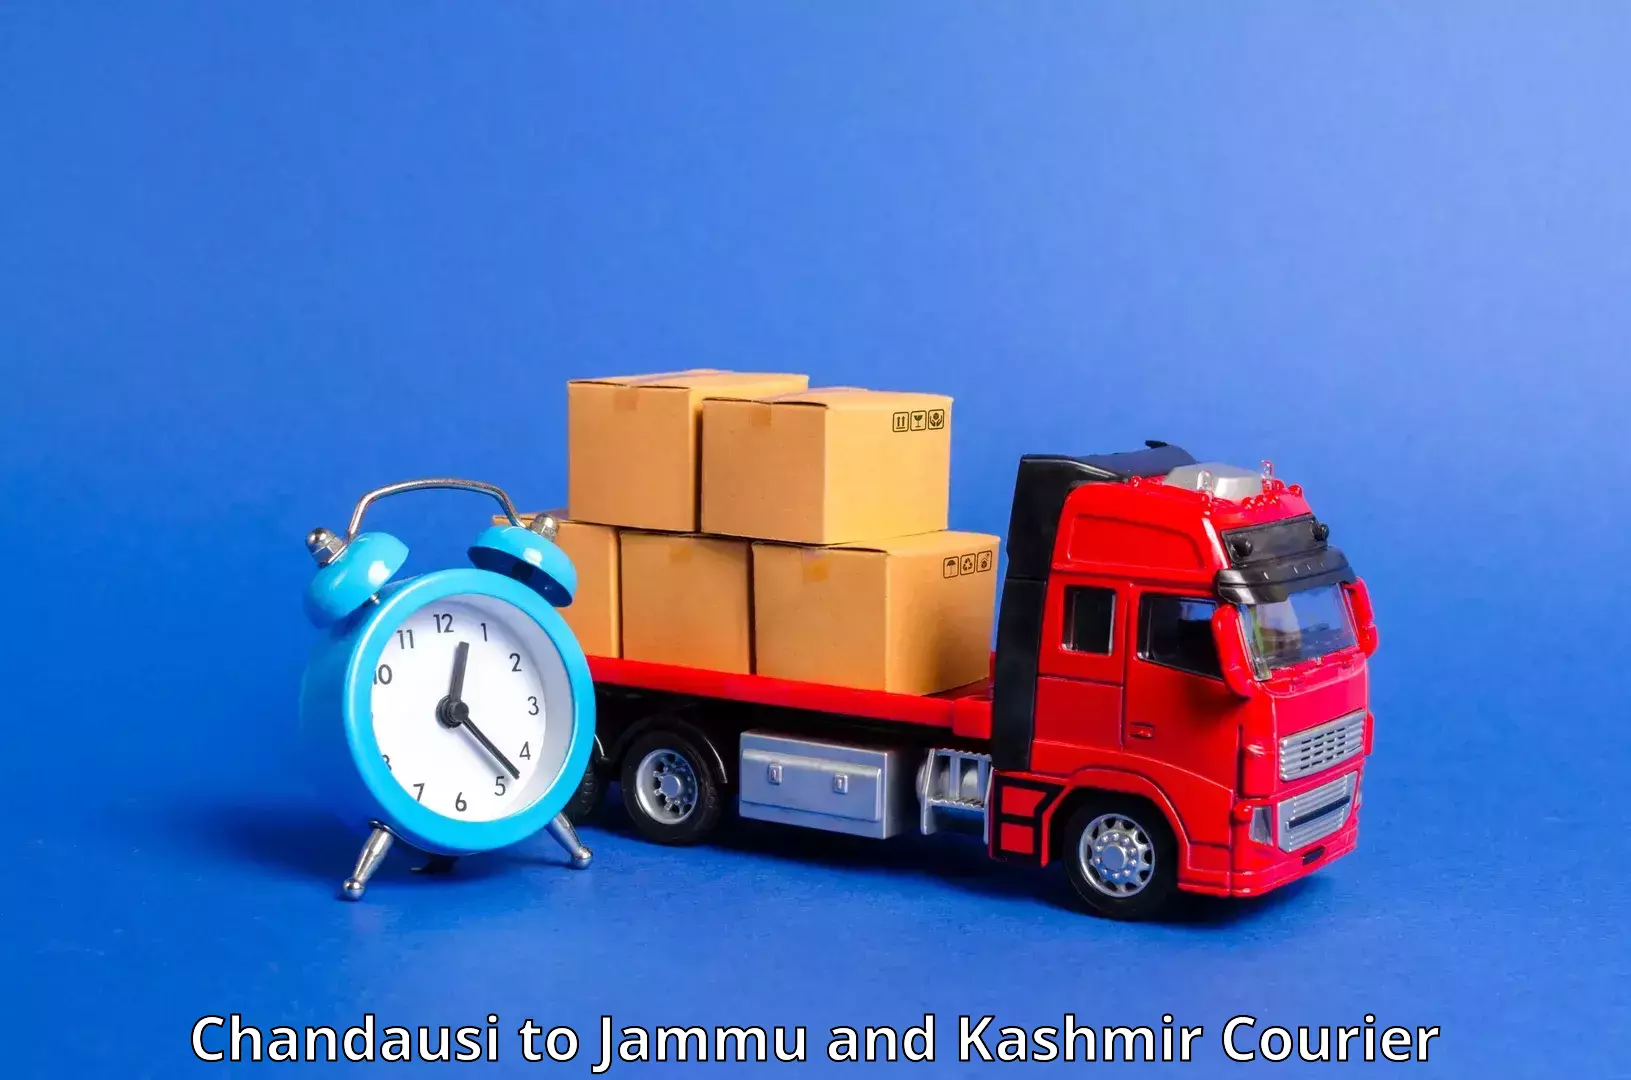 State-of-the-art courier technology Chandausi to Jammu and Kashmir